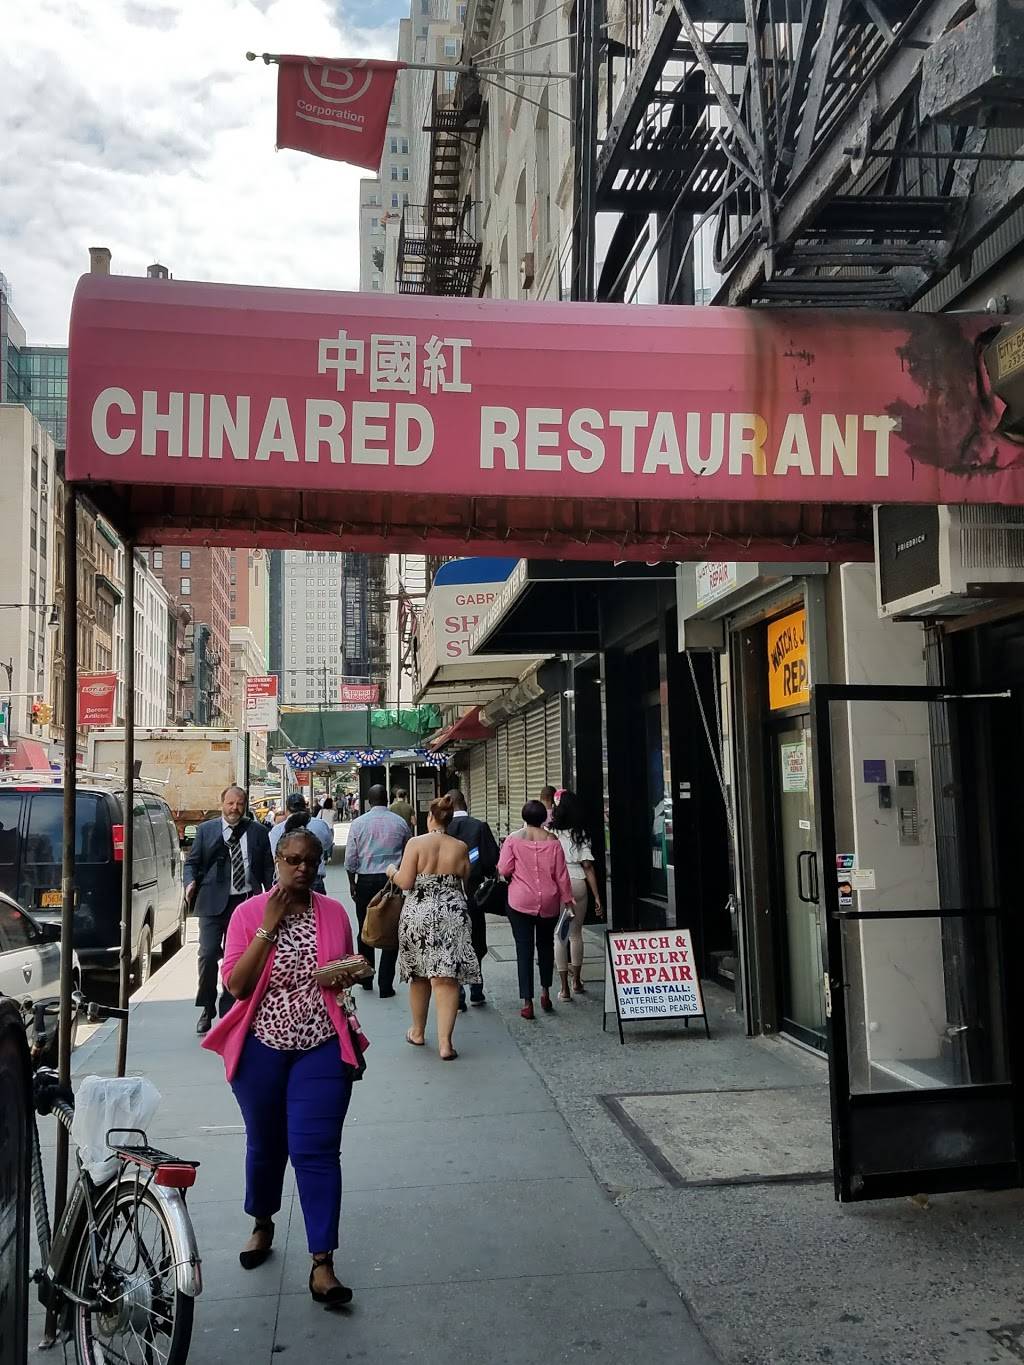 China Red Gourmet | restaurant | 3500, 118 Chambers St C, New York, NY 10007, USA | 2122674015 OR +1 212-267-4015